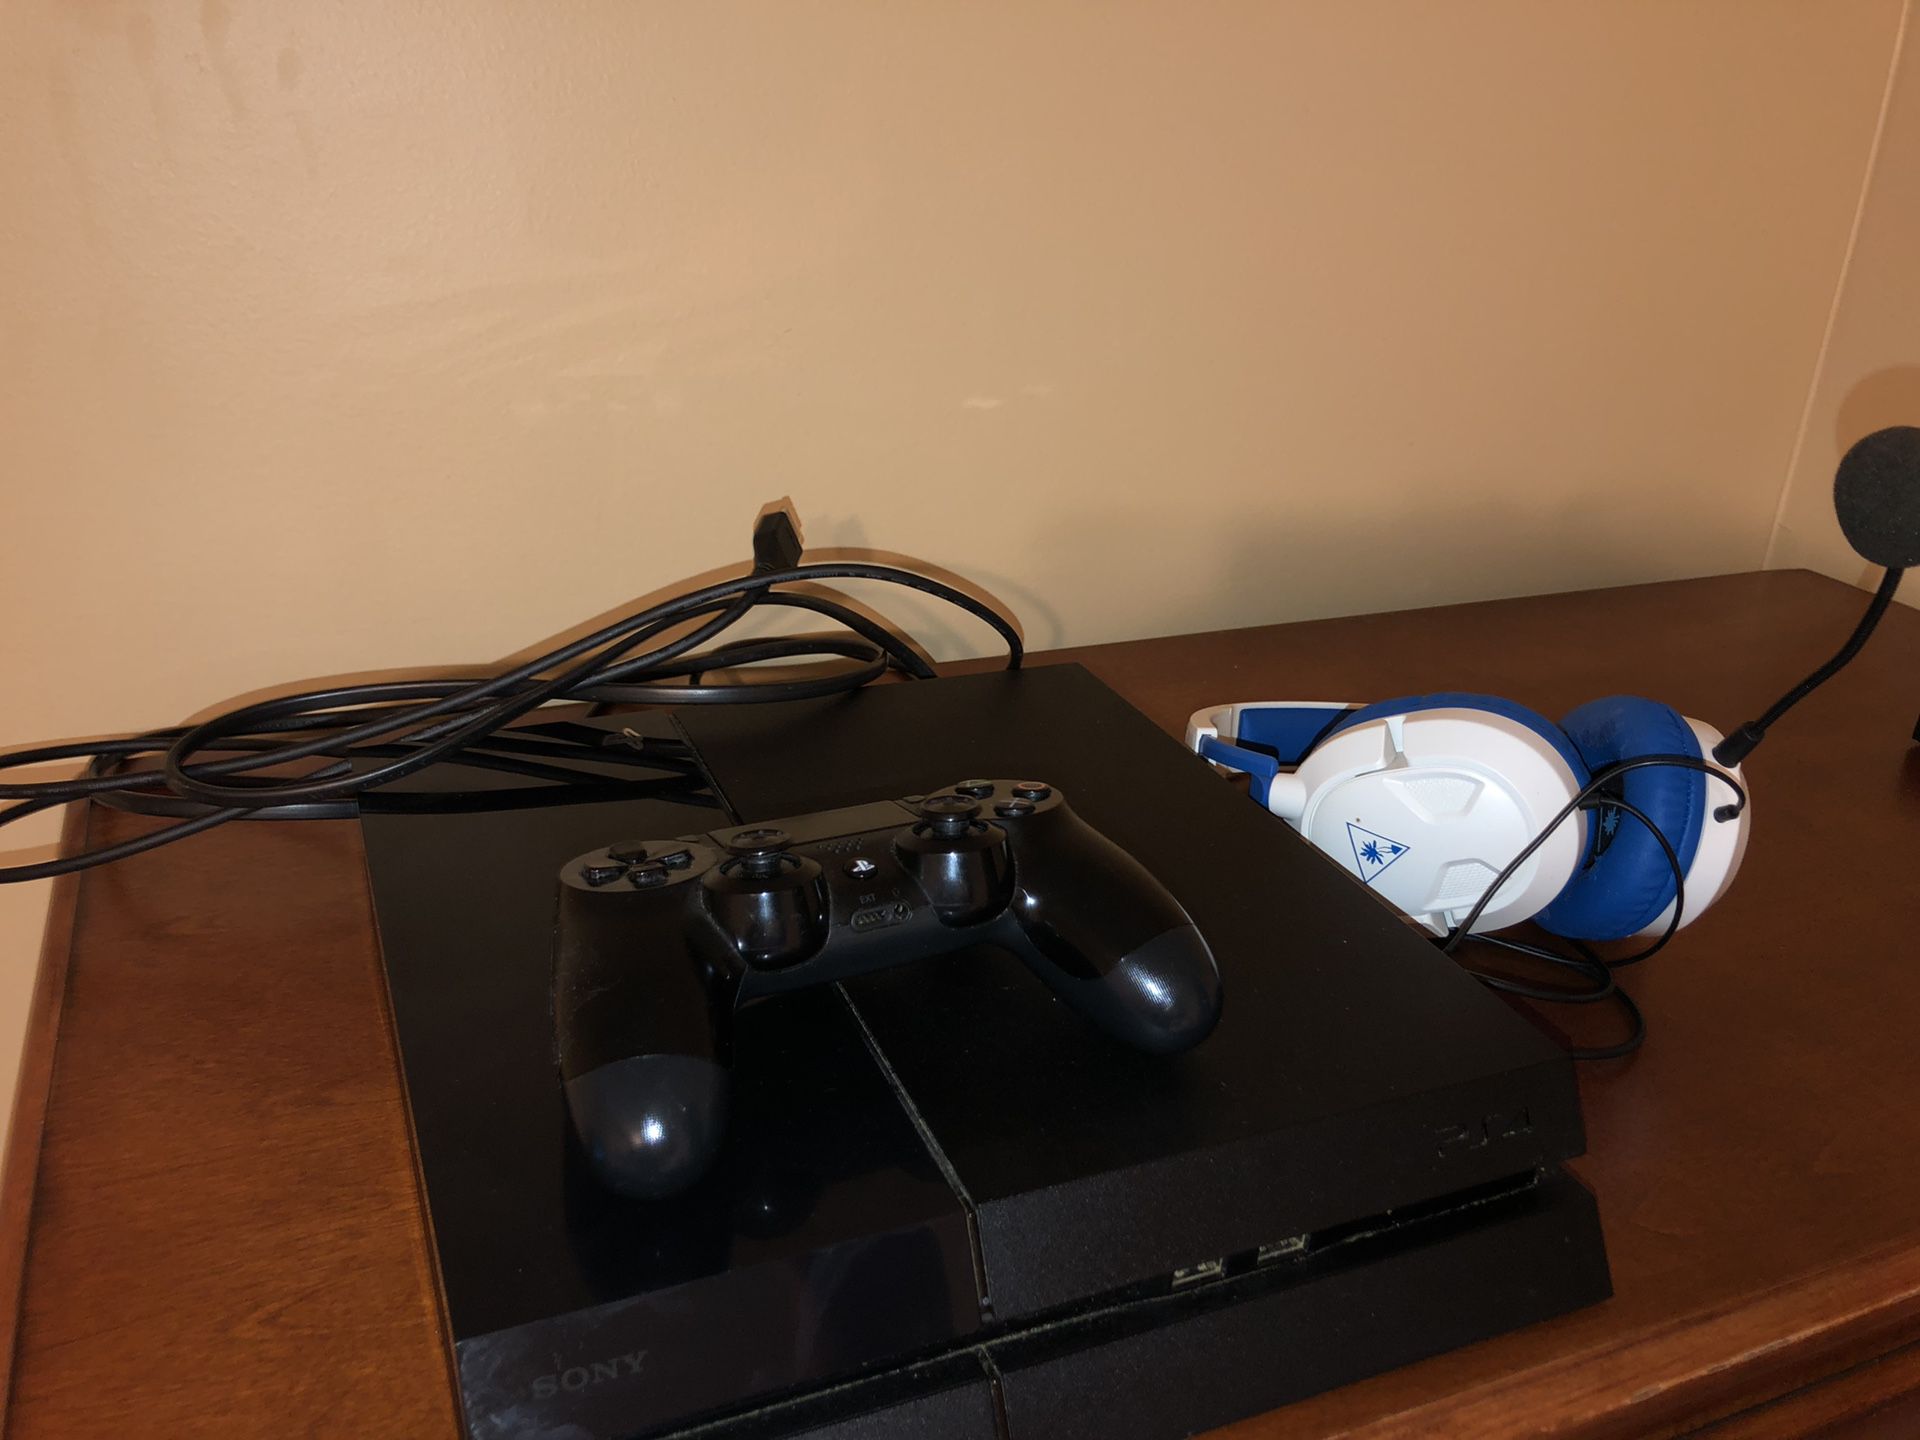 PS4 Console with Controller and Turtle Beach Headset